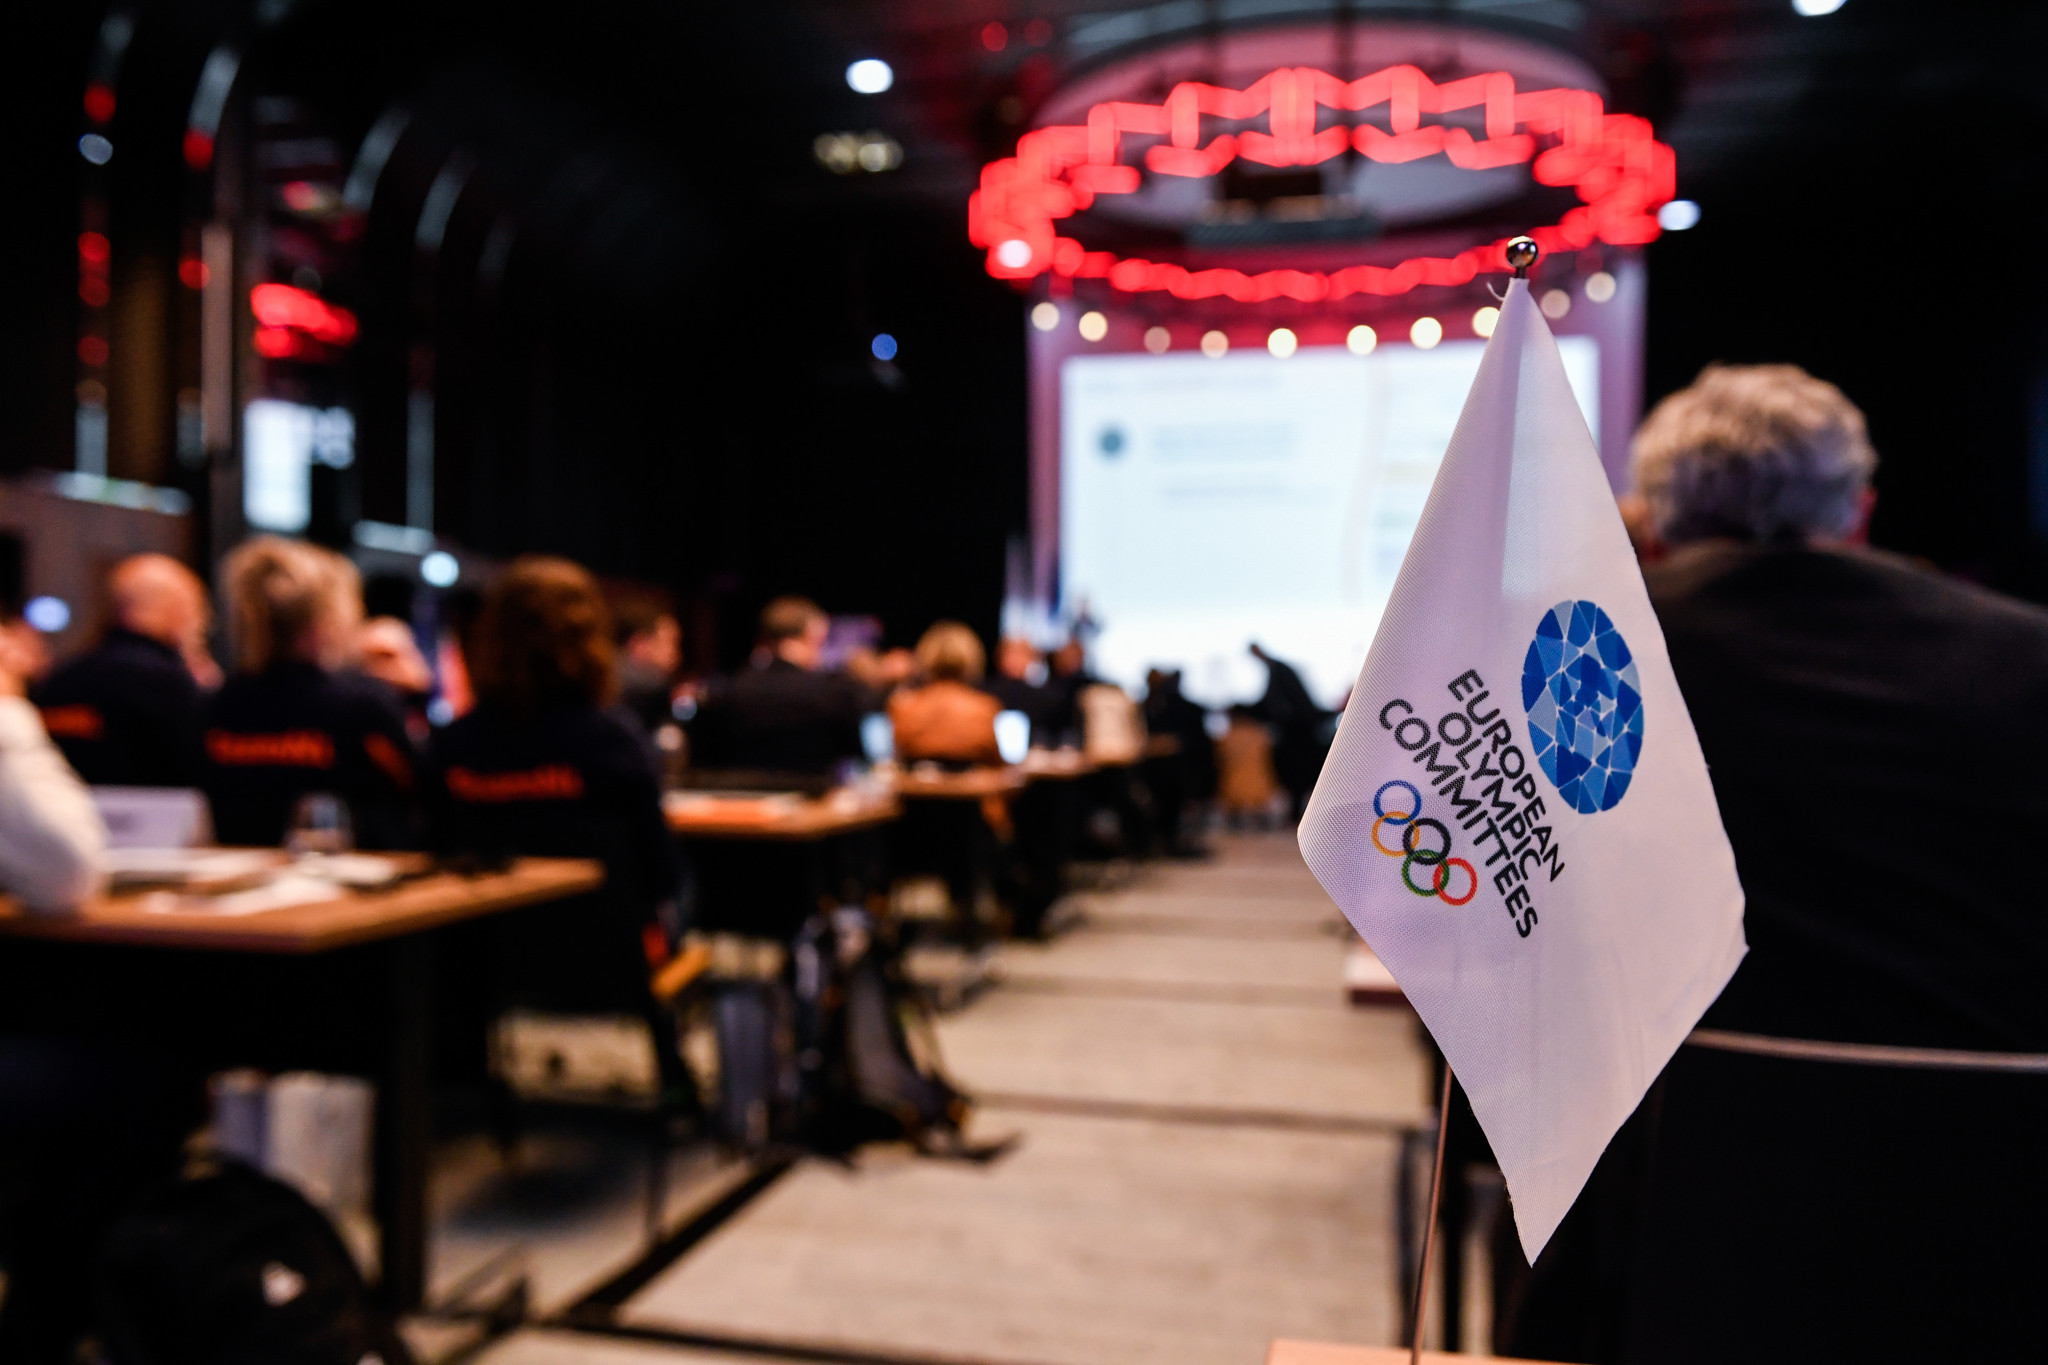 The National Olympic Committee of Ukraine used the 43rd EOC Seminar in Paris to praise the support shown for their following Russia's invasion in February 2022 ©EOC